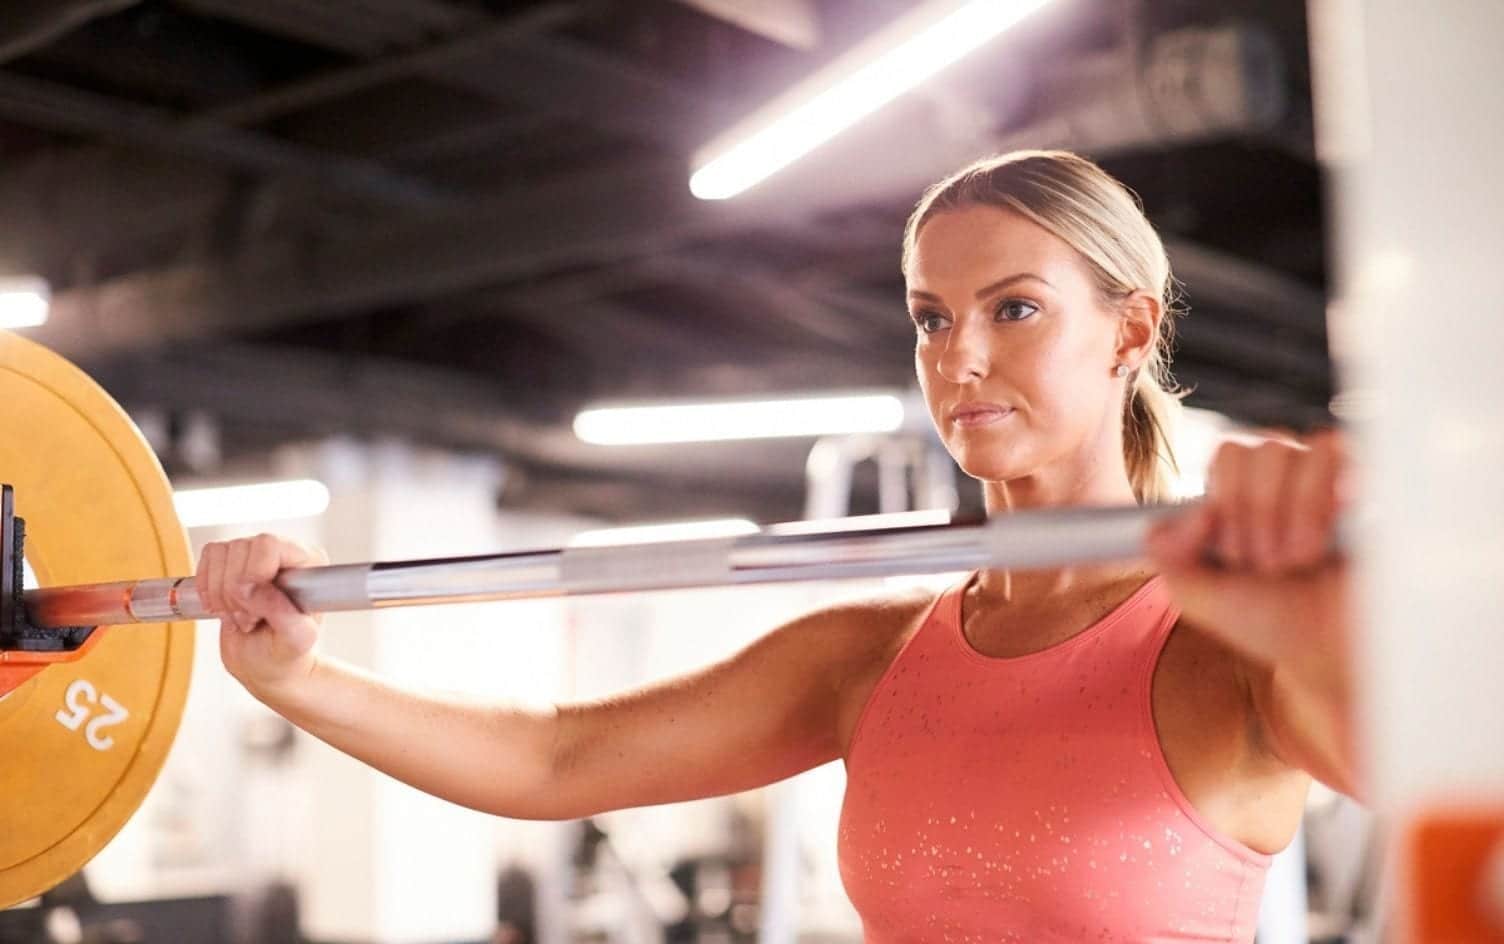 Women Don't Have to Try as Hard at The Gym to Reap Long-Term